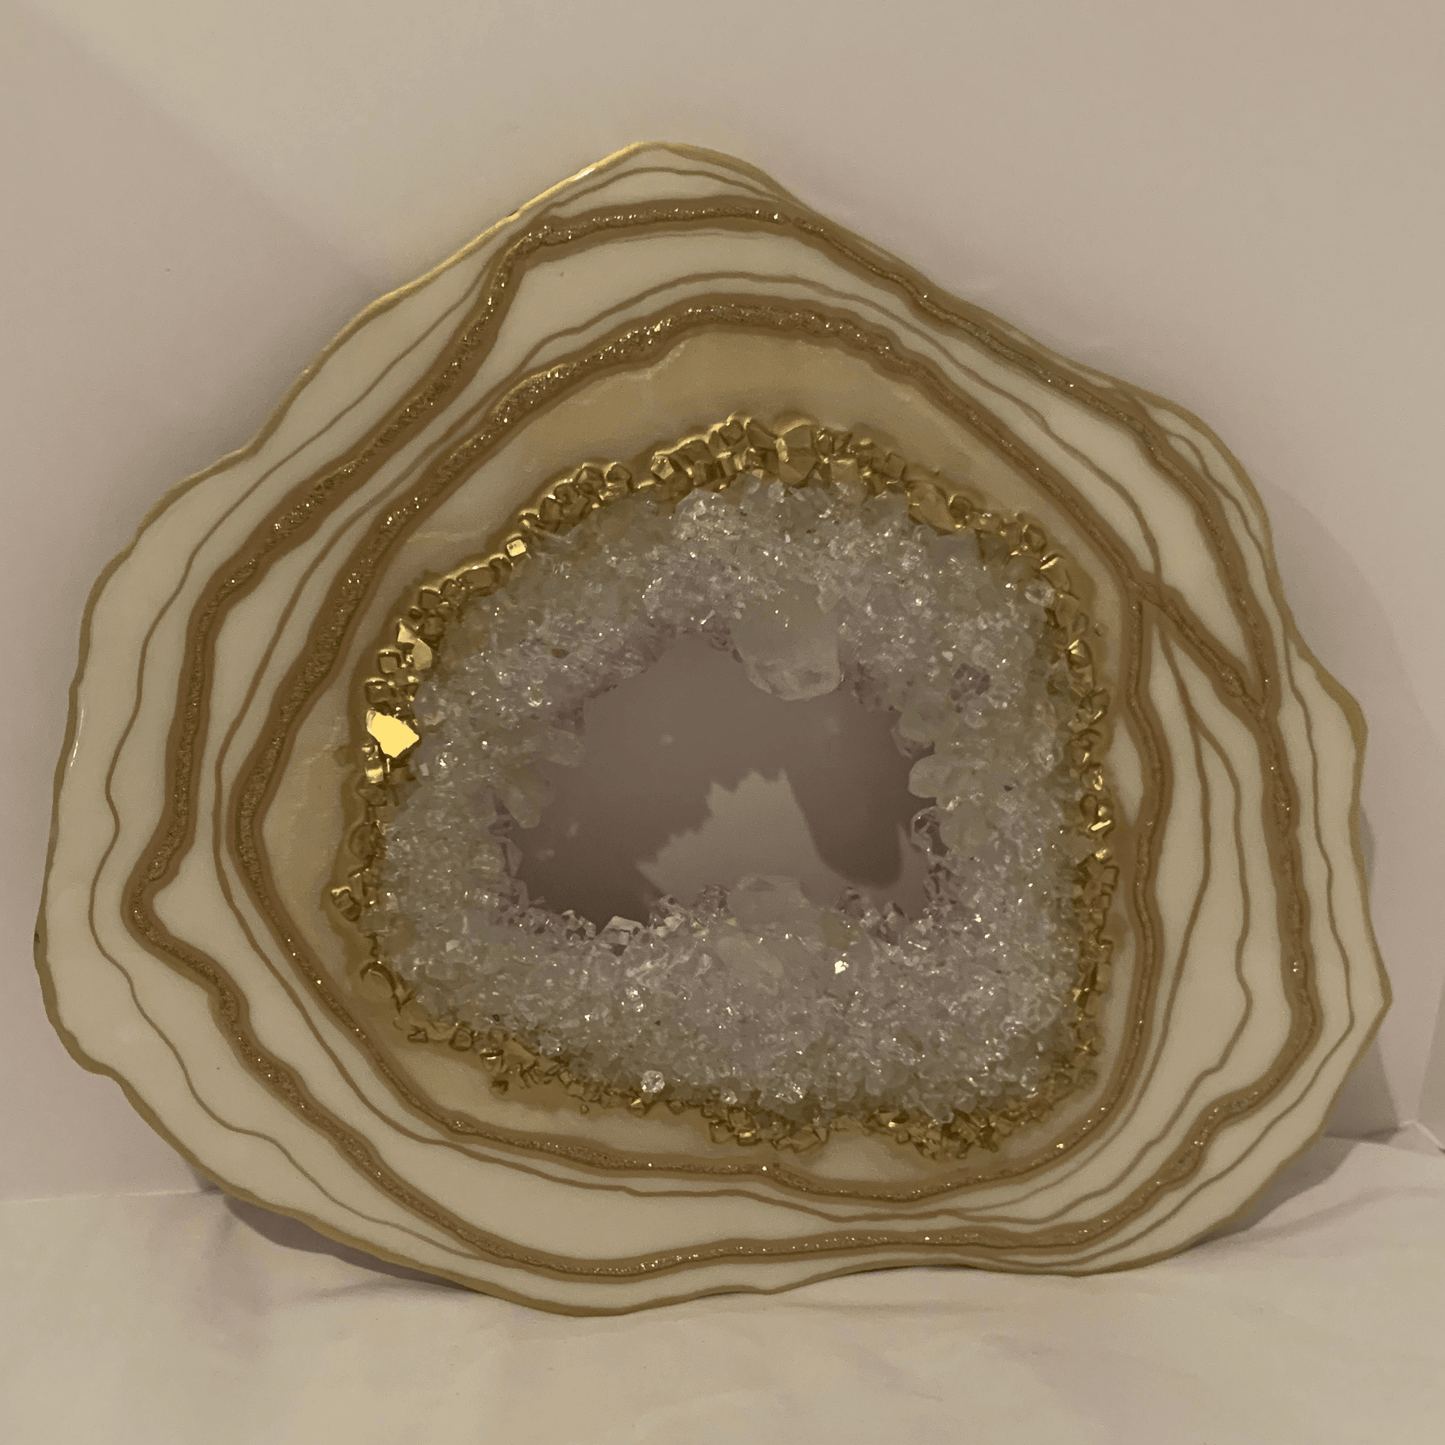 "CREAMY WHITE & GOLD GEODE" Modern Resin Art With Real Crystal Quartz Points